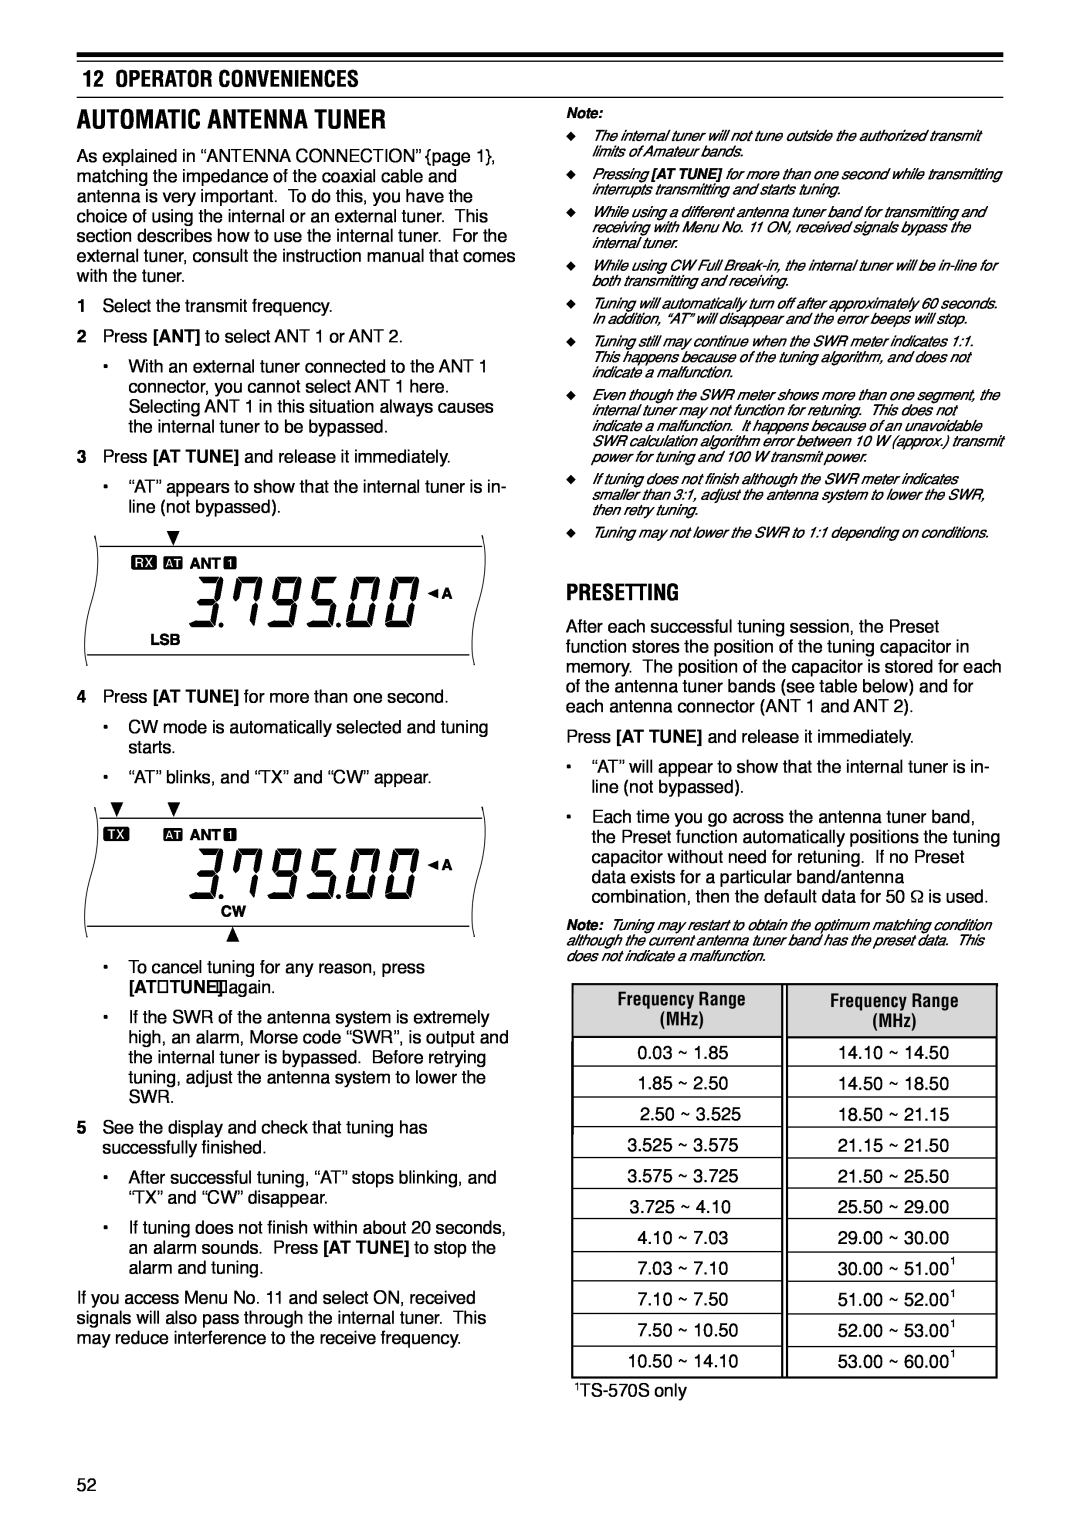 Kenwood TS-570D instruction manual Automatic Antenna Tuner, Presetting, Operator Conveniences 